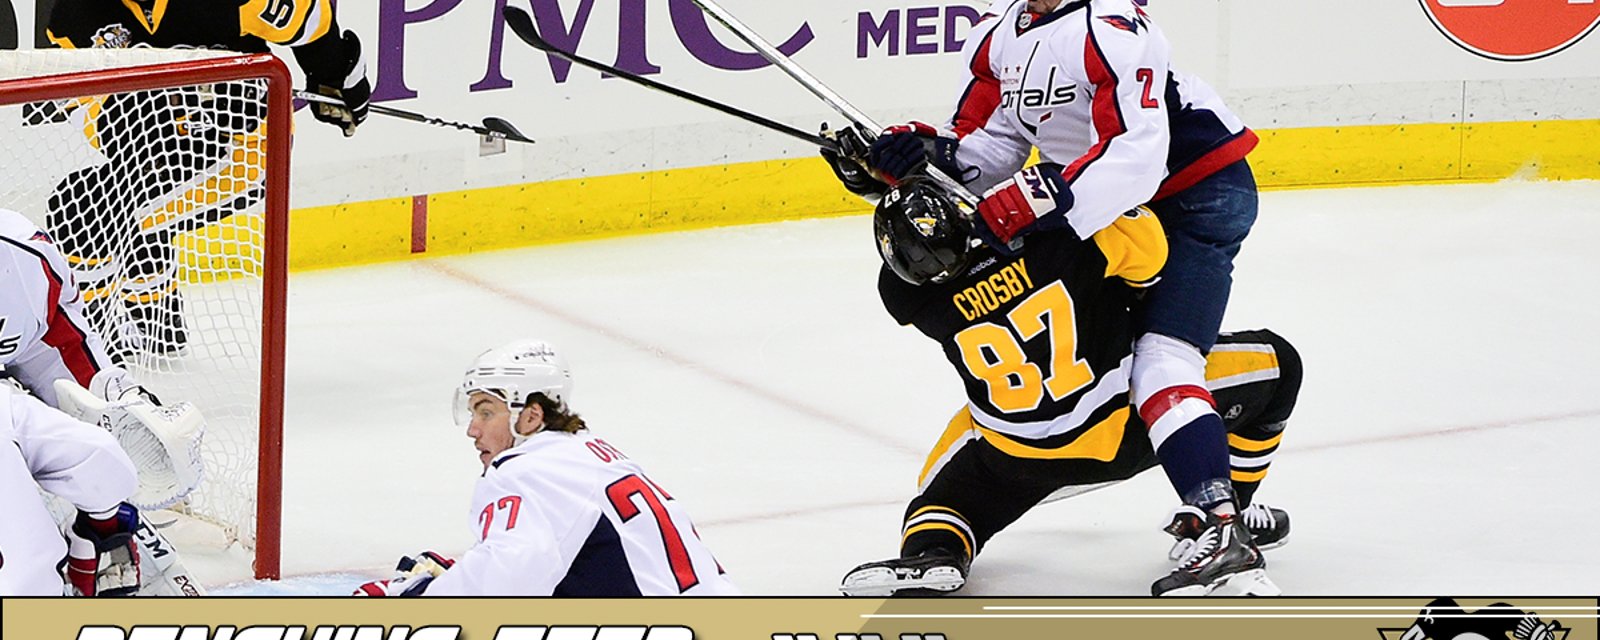 REPORT: Pittsburgh media calls for Ovechkin suspension